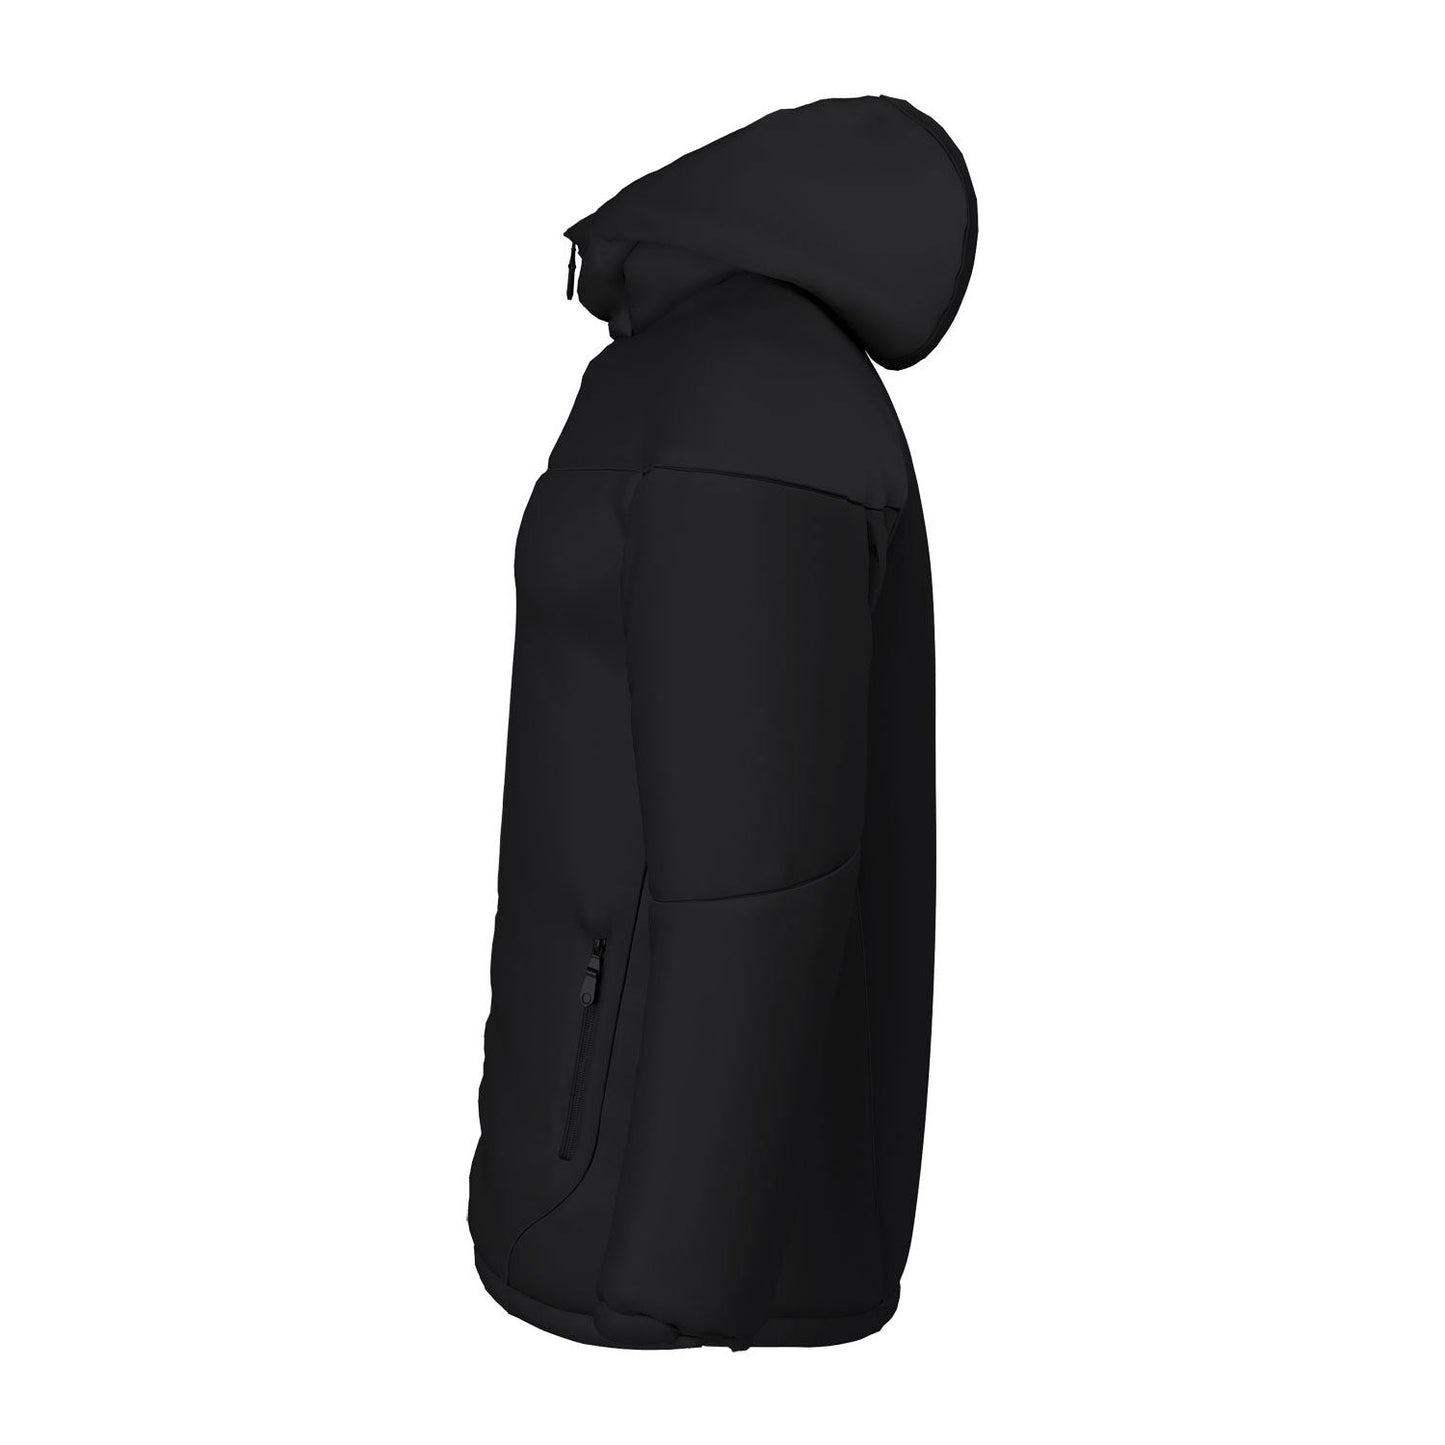 Copy of Contoured Thermal Jacket